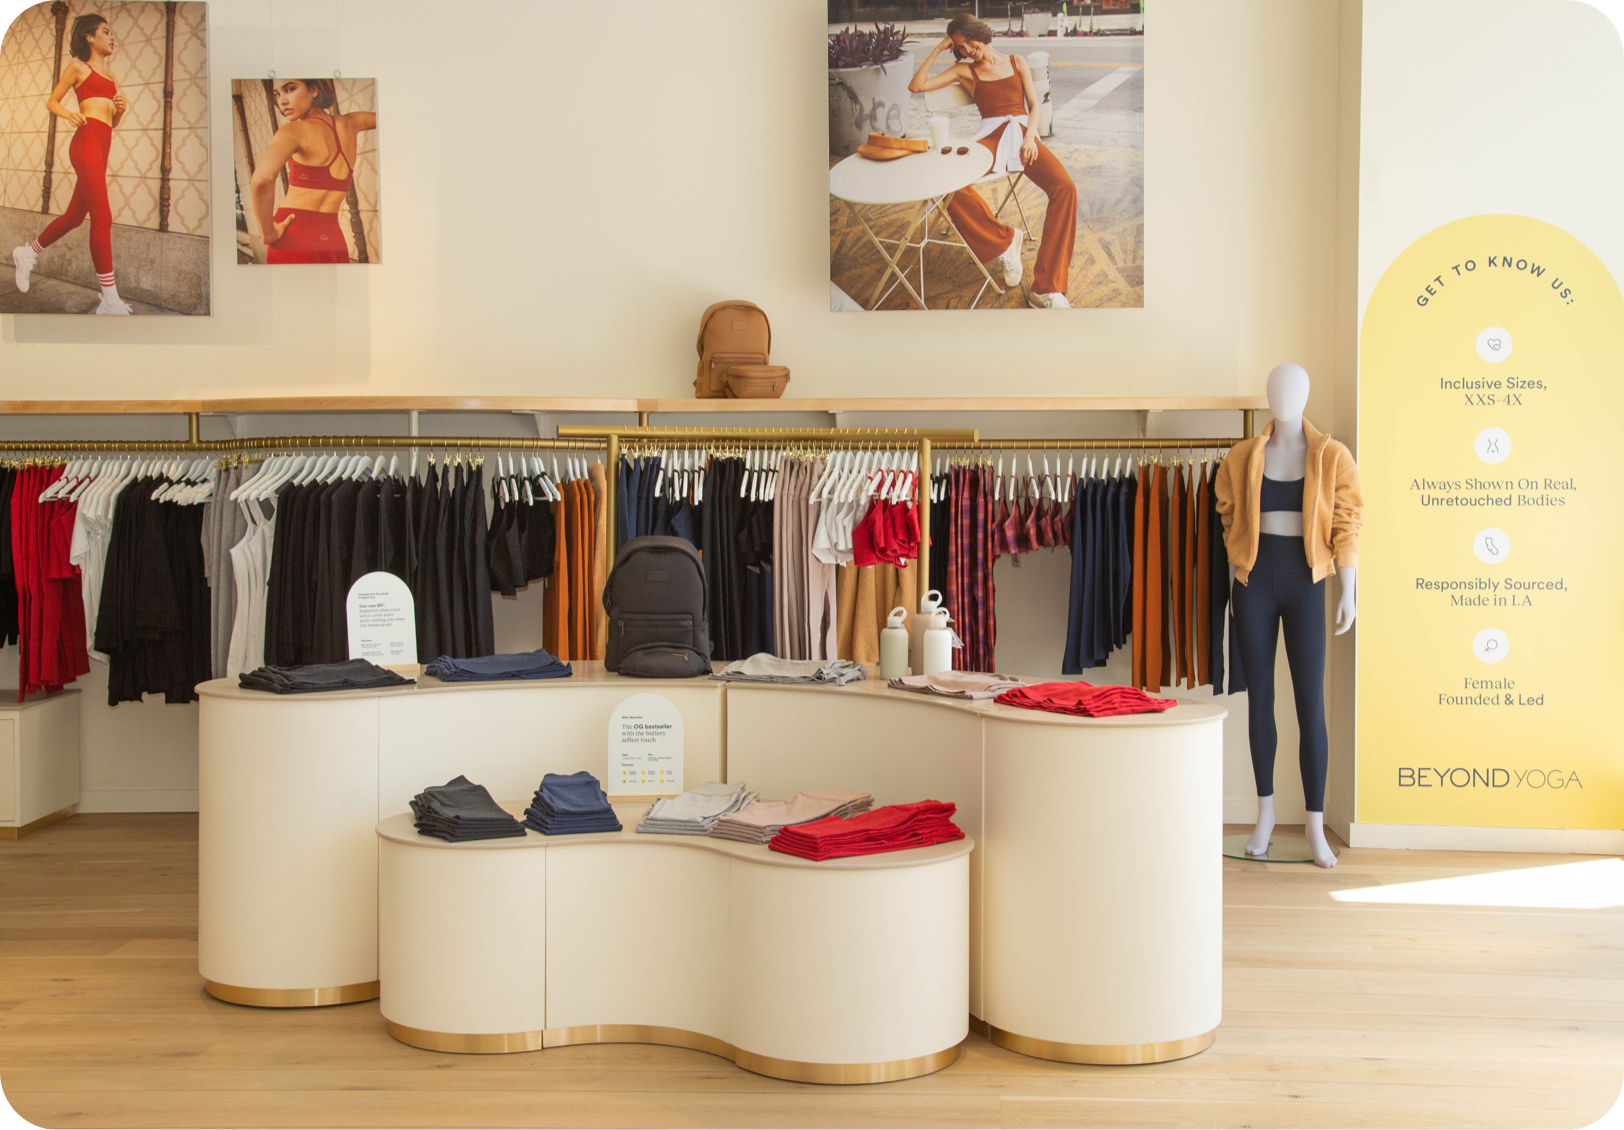 Indoor image of Santa Monica store featuring clothing and marketing imagery